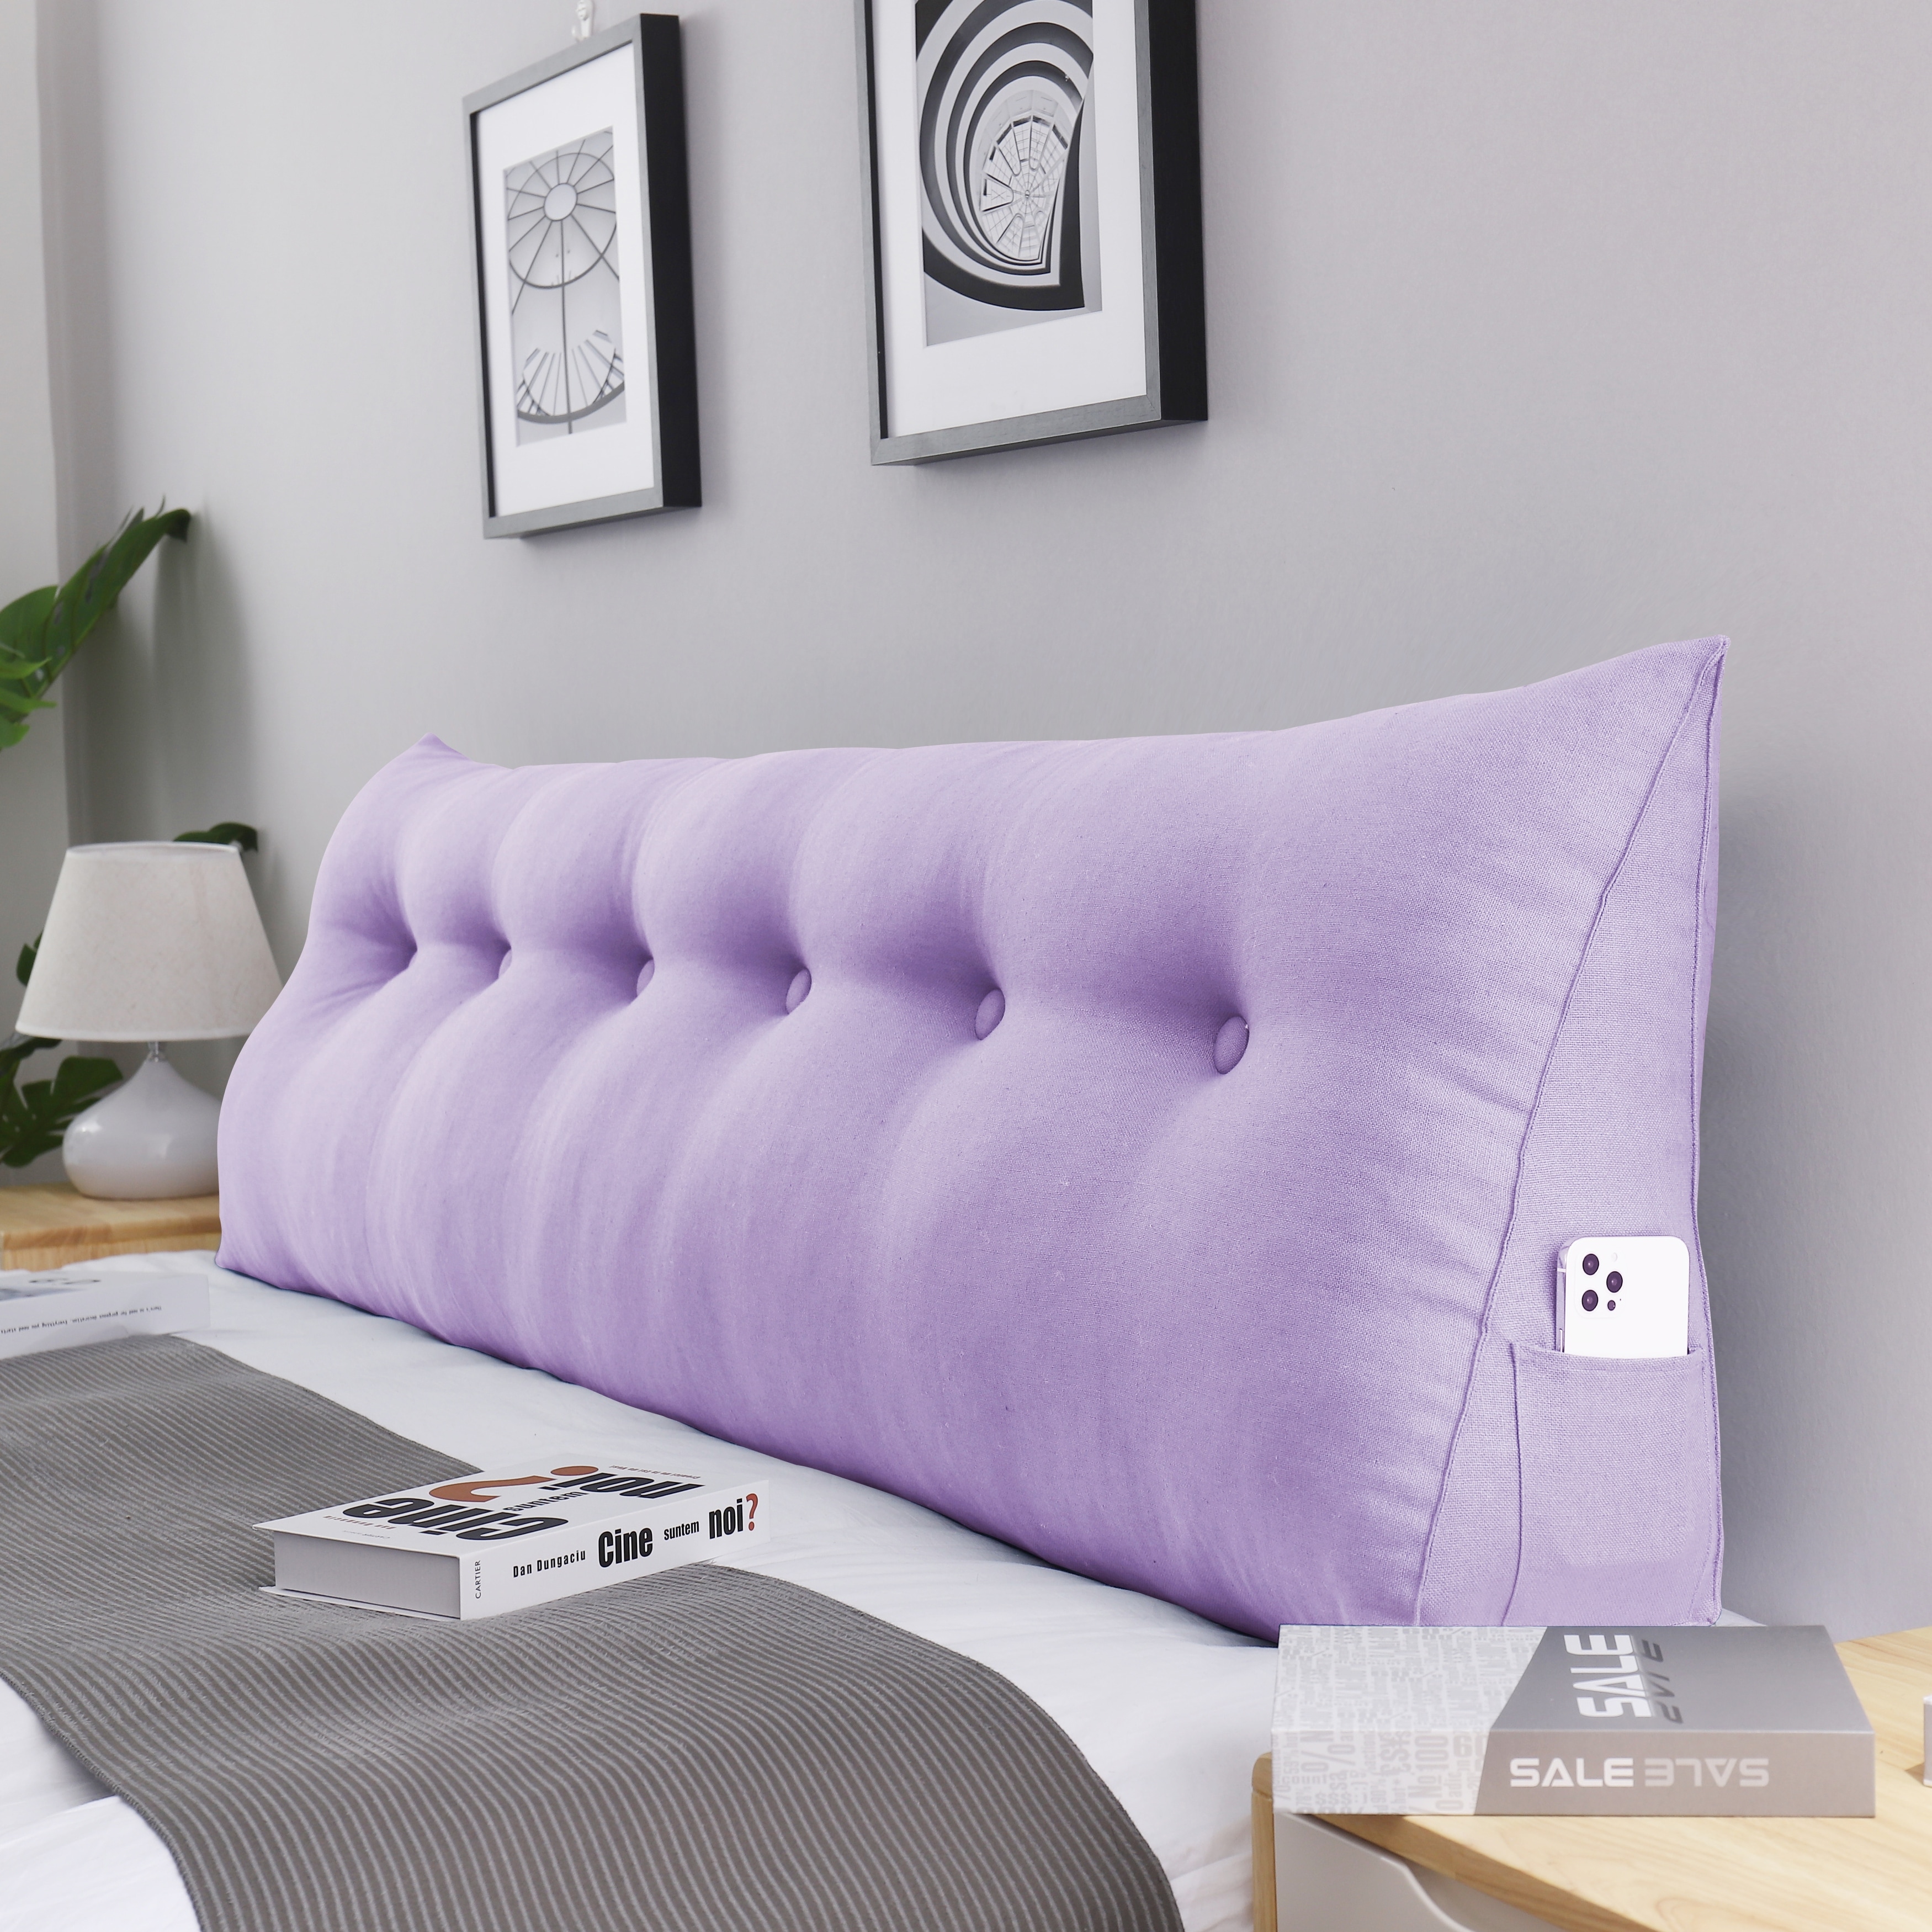 https://ak1.ostkcdn.com/images/products/is/images/direct/bbf459f4ce4567cf7e01c30297e9dced1df0ae1a/WOWMAX-Bed-Rest-Wedge-Pillow-Headboard-Reading-TV-Back-Support-Cushion.jpg